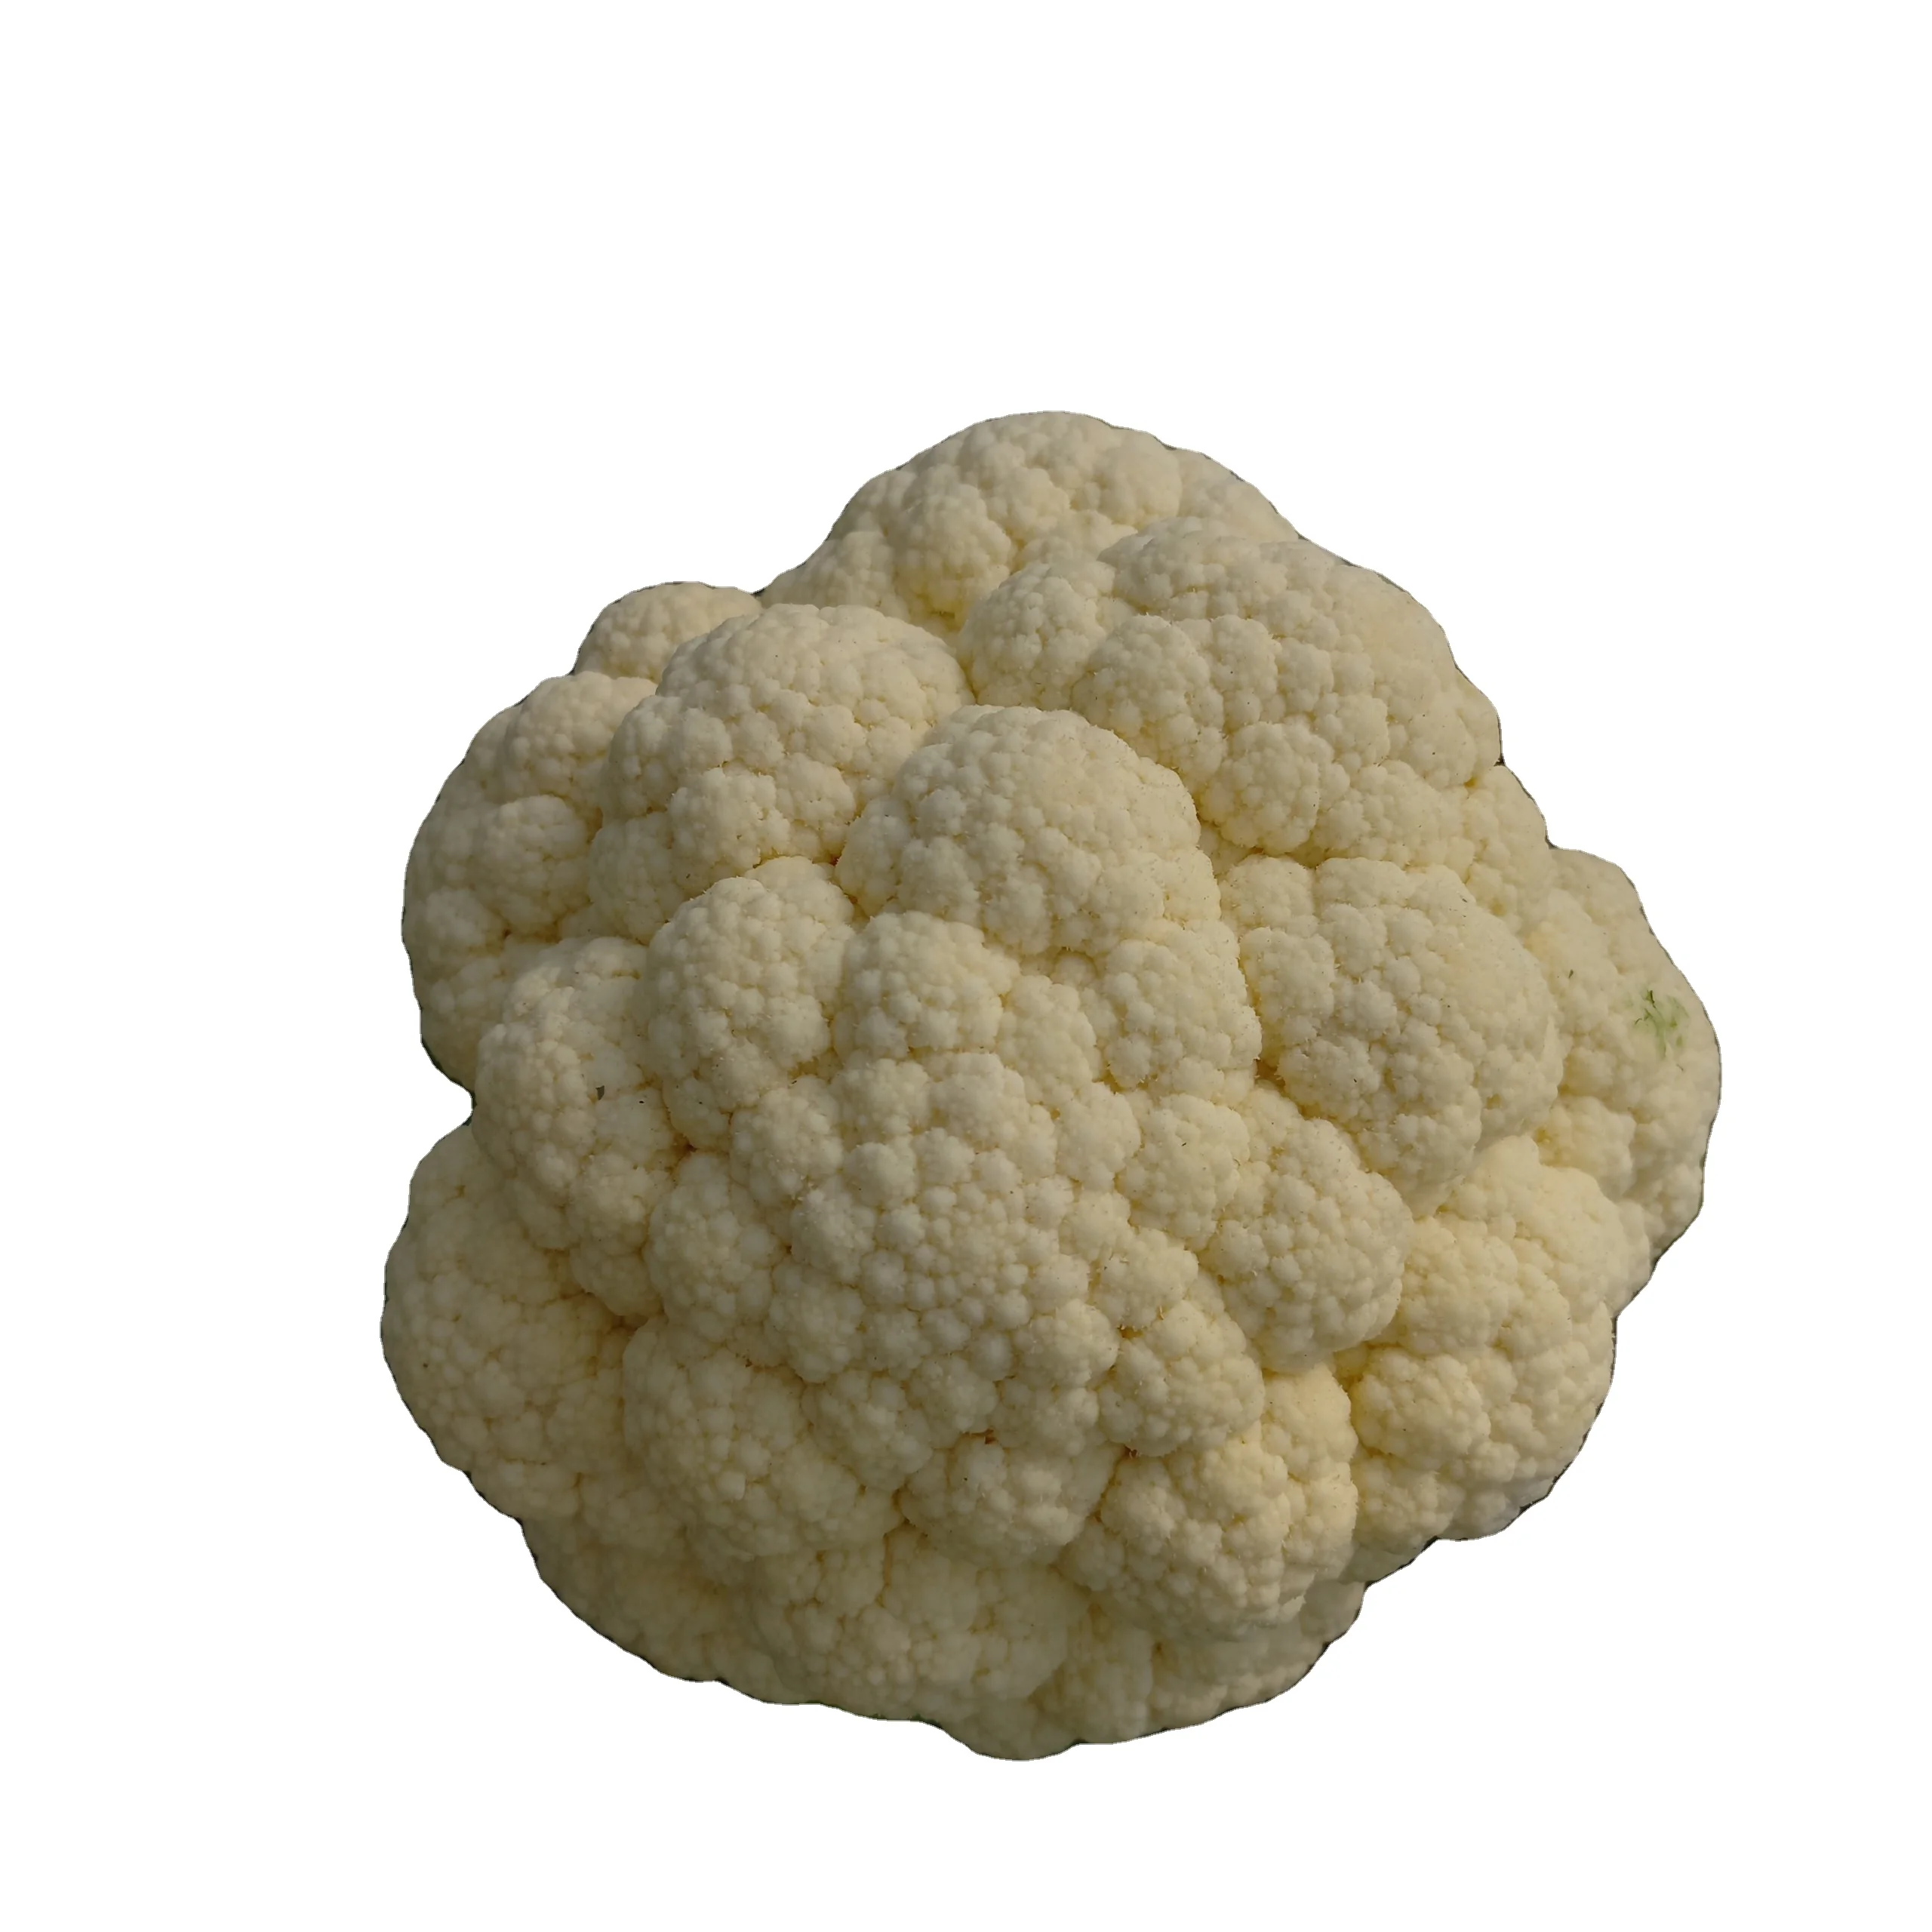 Premium Cauliflower Florets for Export from Vietnam with Skillfully Selected, Painstakingly Packed